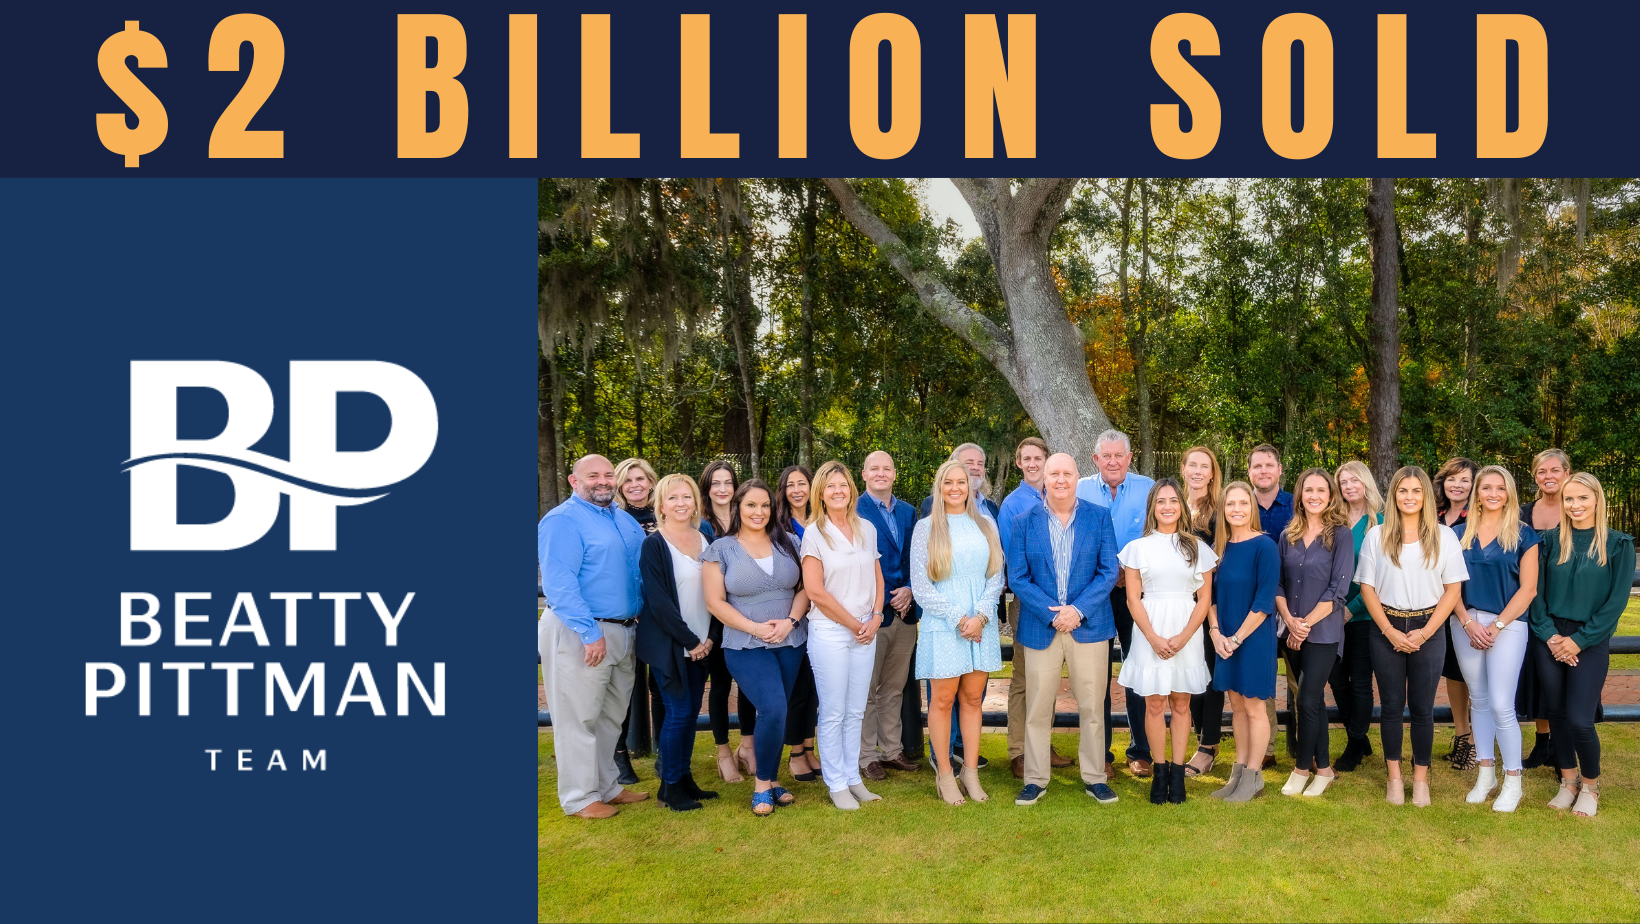 PRESS RELEASE: Intracoastal Realty’s Beatty Pittman Team Announces $2 Billion In Sales Volume Over Successful 30-Year Career